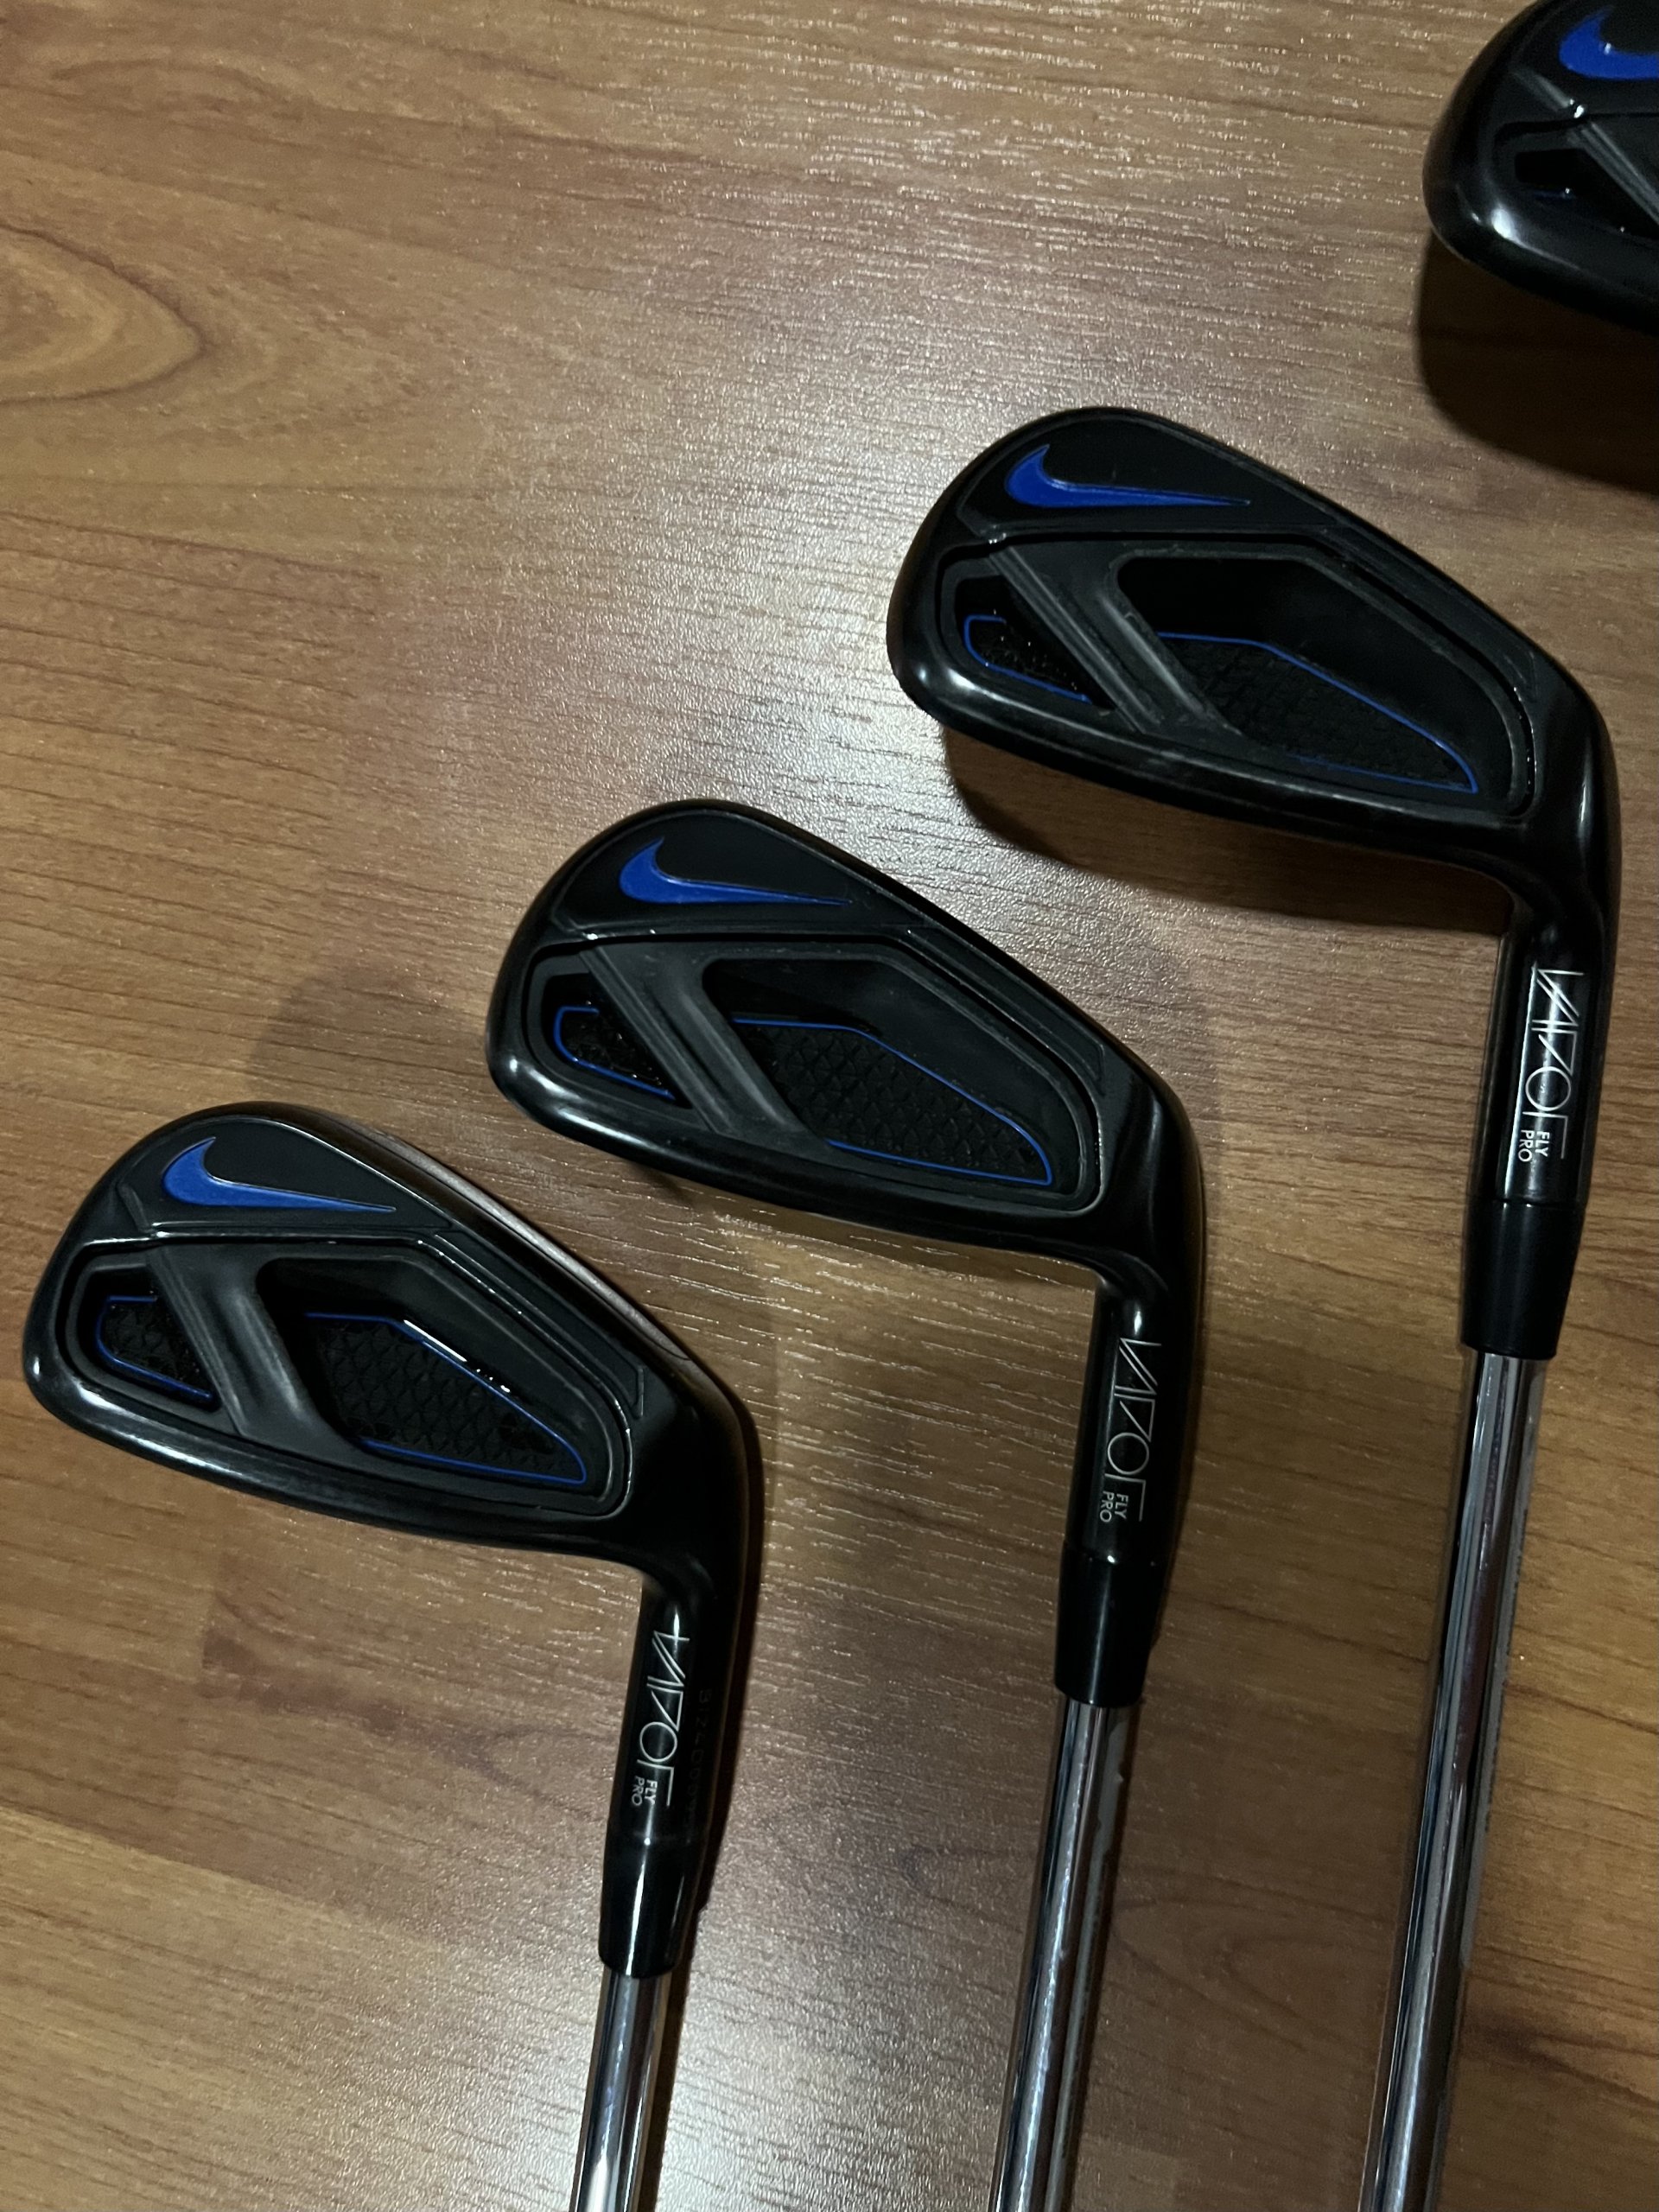 Nike Vapor Fly Pro Irons - sell trade new & used golf gear